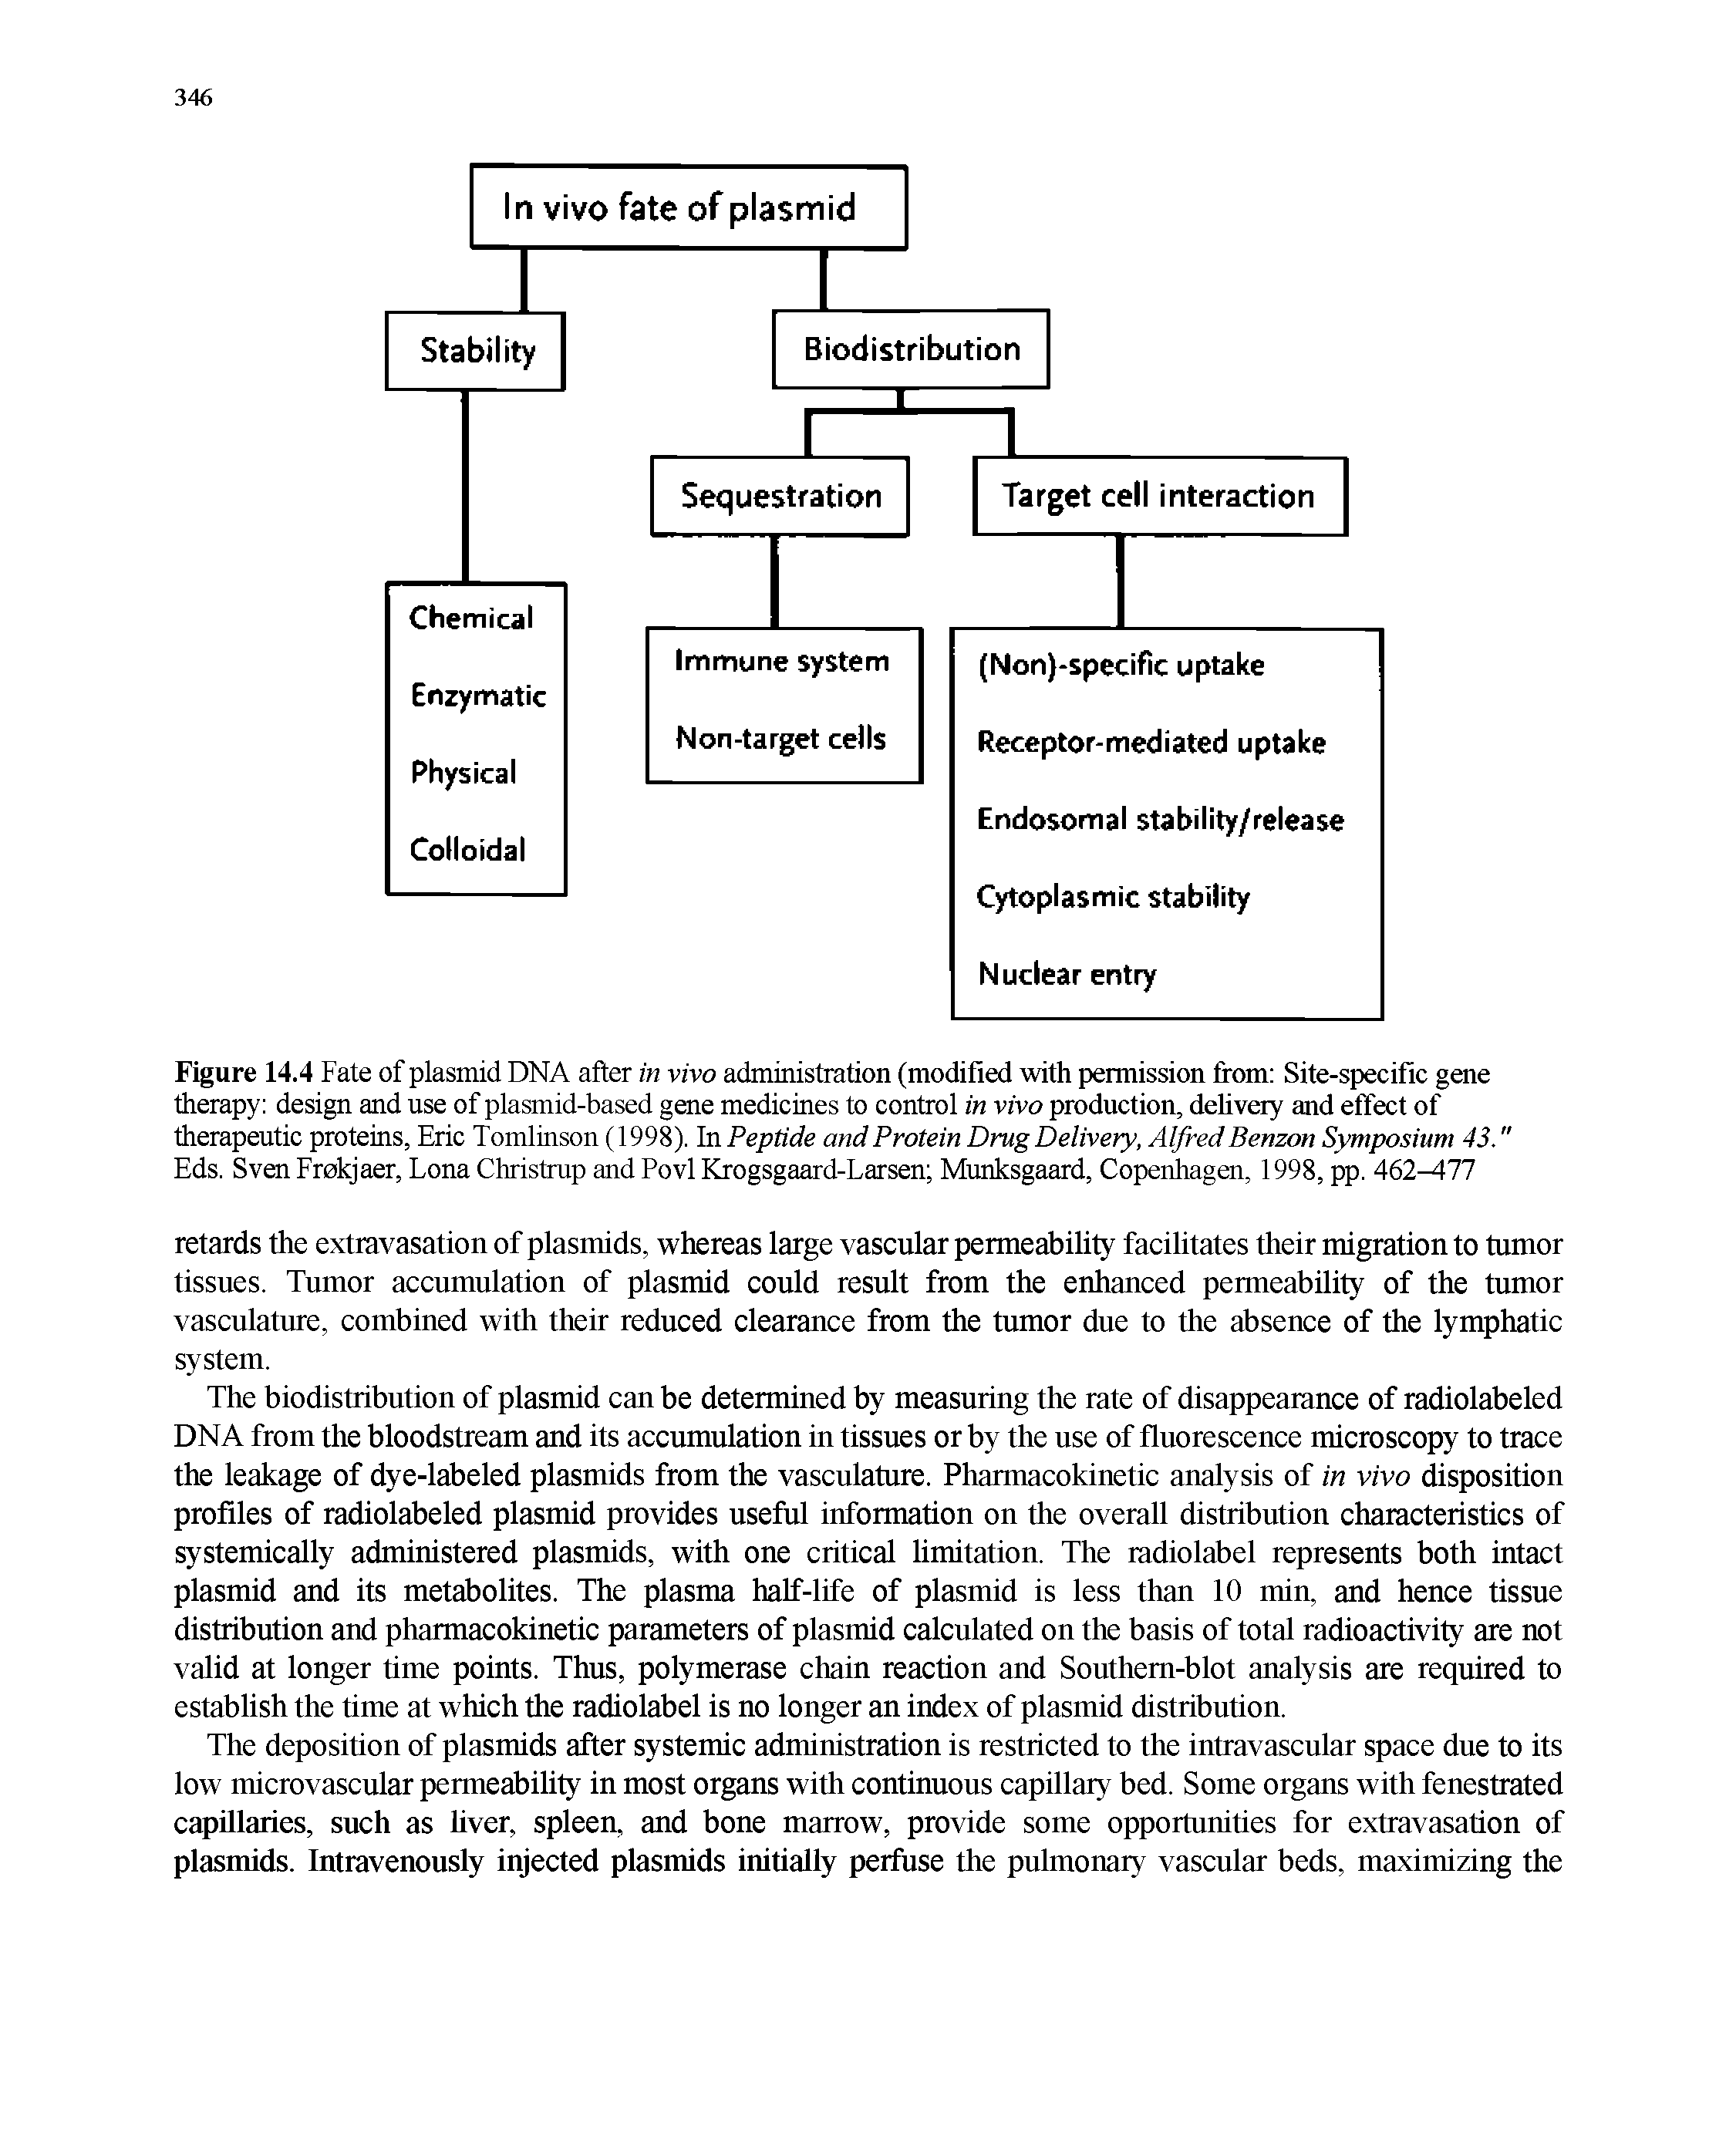 Figure 14.4 Fate of plasmid DNA after in vivo administration (modified with permission from Site-specific gene therapy design and use of plasmid-based gene medicines to control in vivo production, delivery and effect of therapeutic proteins, Eric Tomlinson (1998). In Peptide and Protein Drug Delivery, Alfred Benzon Symposium 43."...